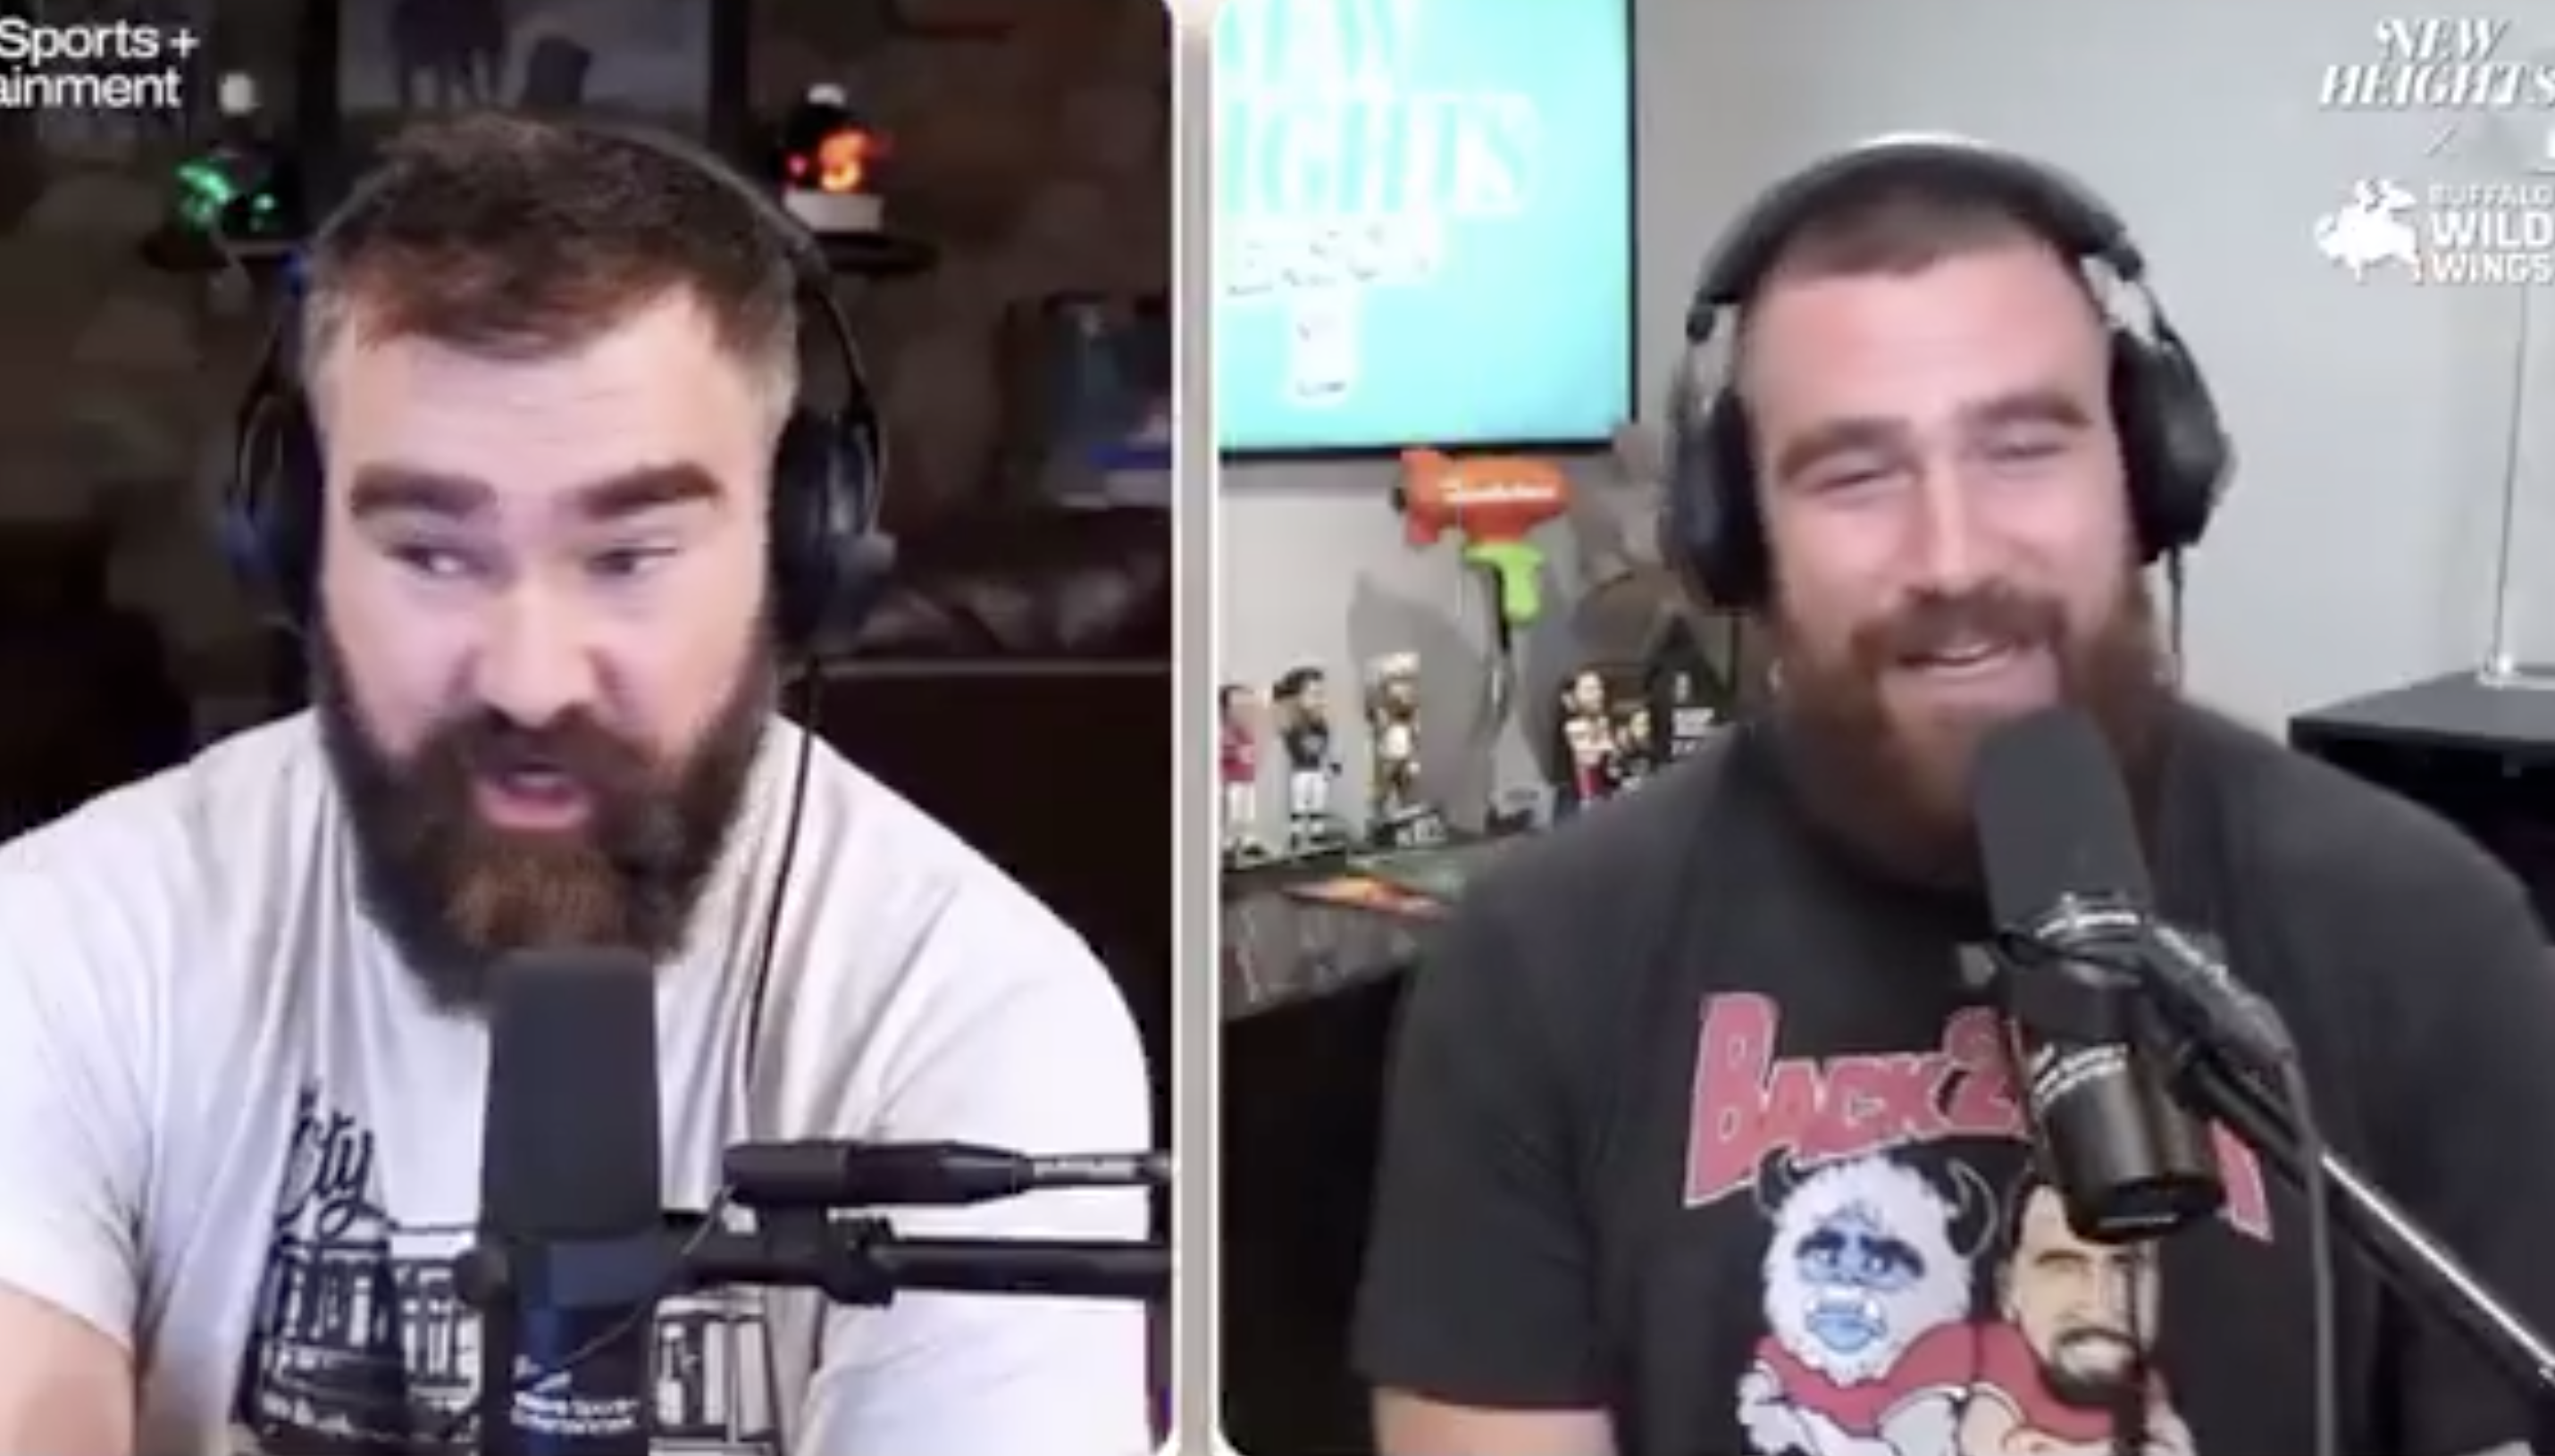 Travis and Jason laughing during a podcast, with Travis wearing a graphic T-shirt